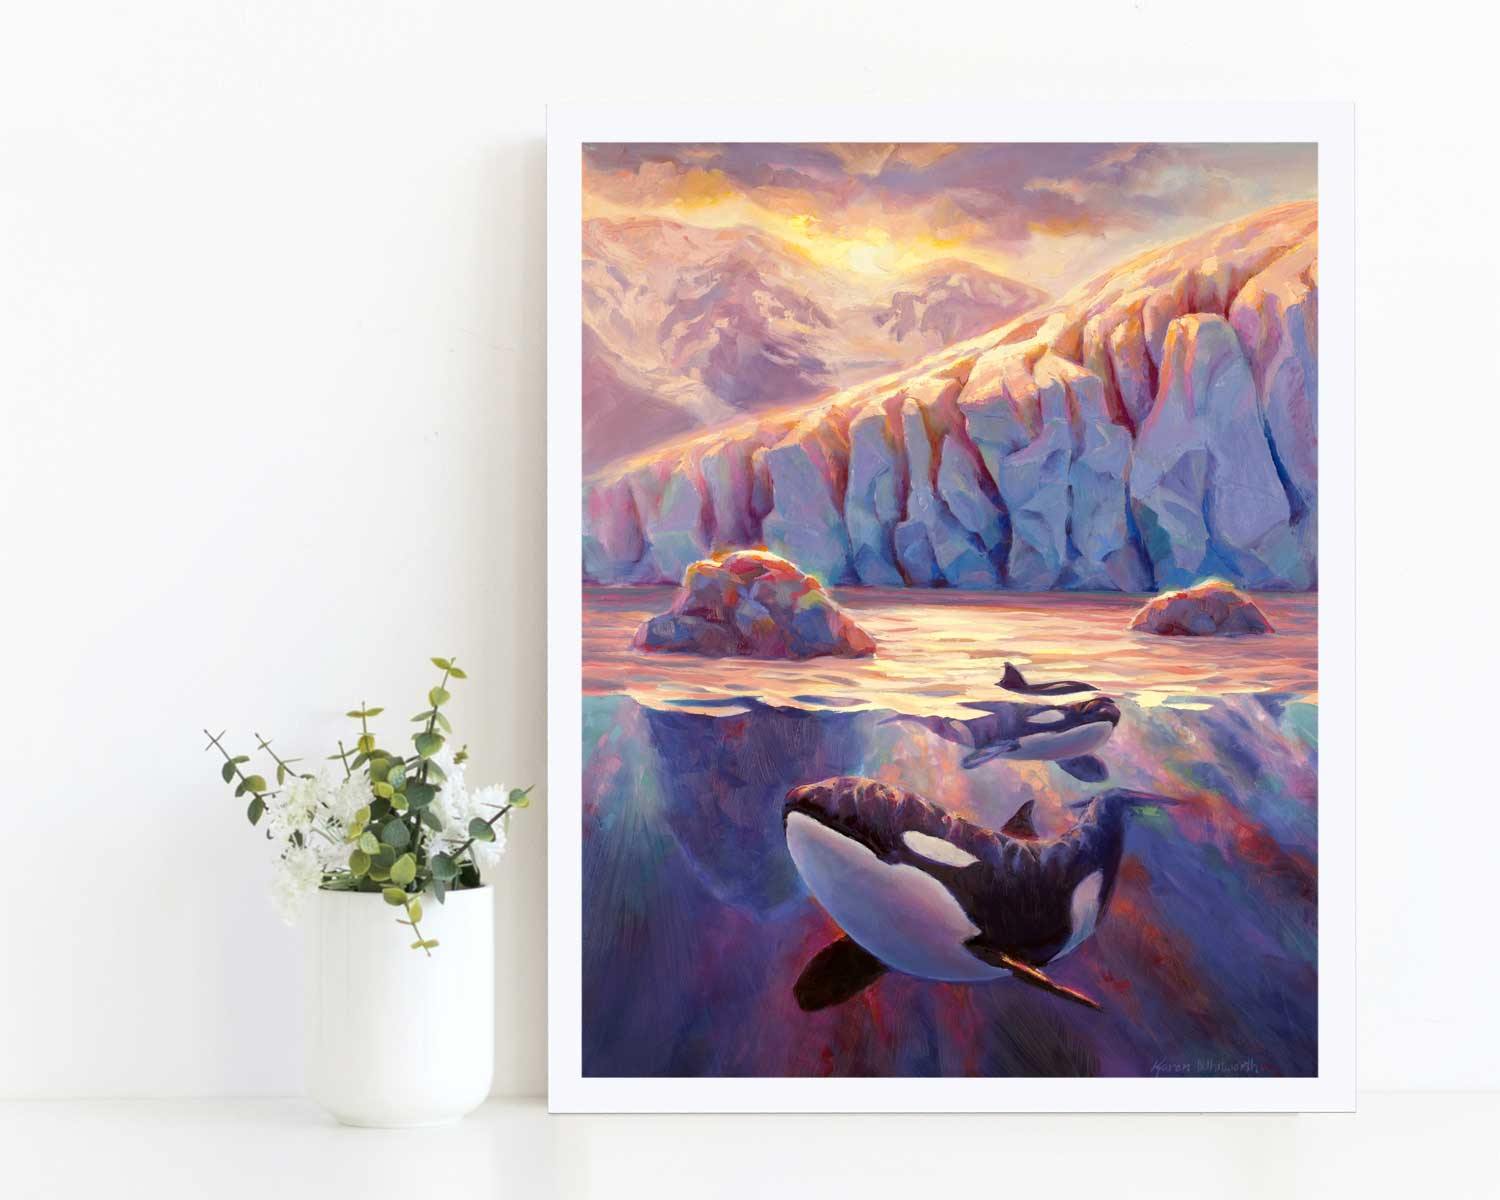 Paper wall art print of Orca whales and Alaskan glacier landscape painting by artist Karen Whitworth